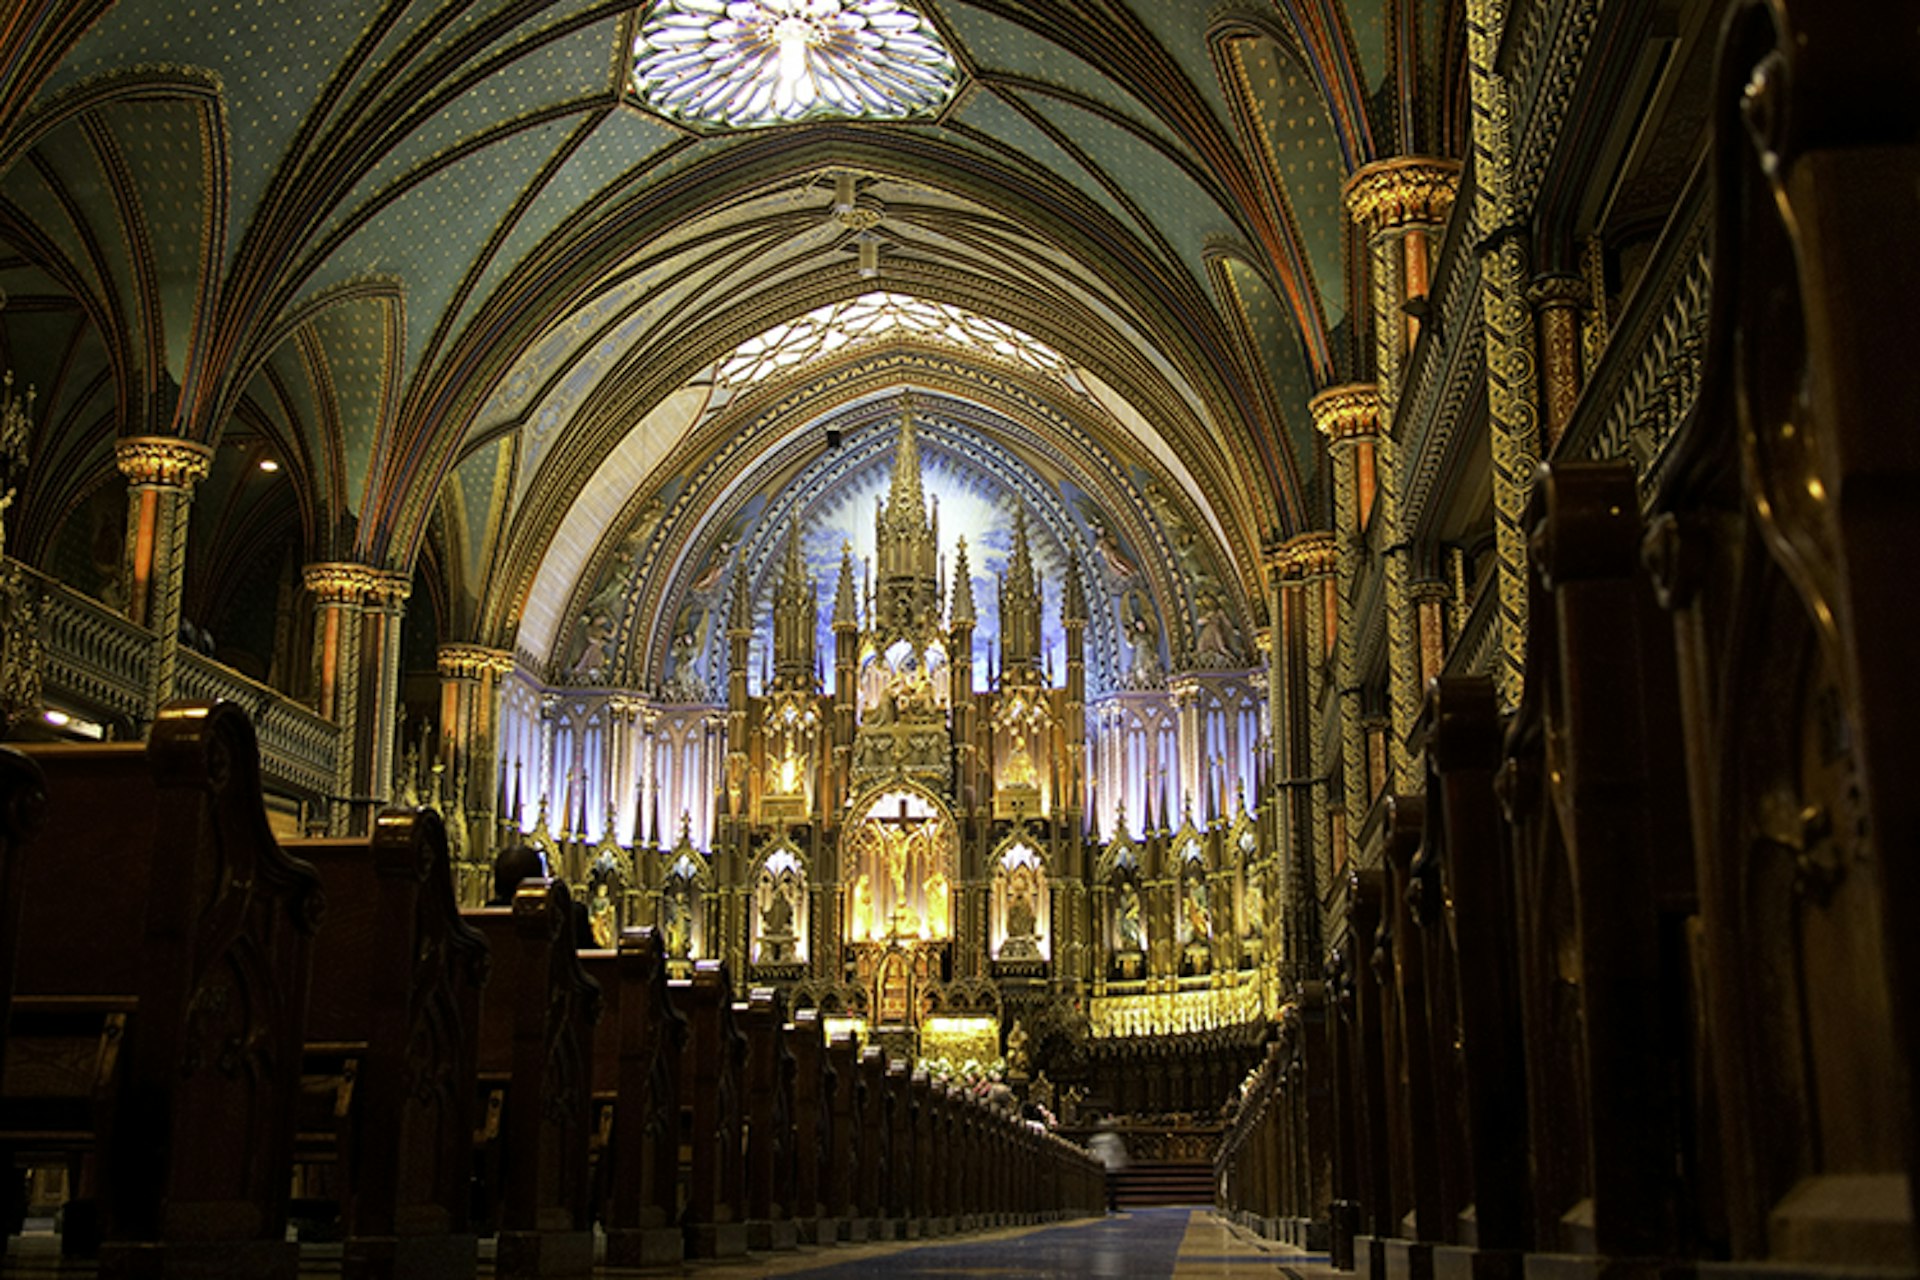 Stick around for an evening sound and light show at the Basilique Notre-Dame. Image by |vv@ldzen| / CC BY 2.0